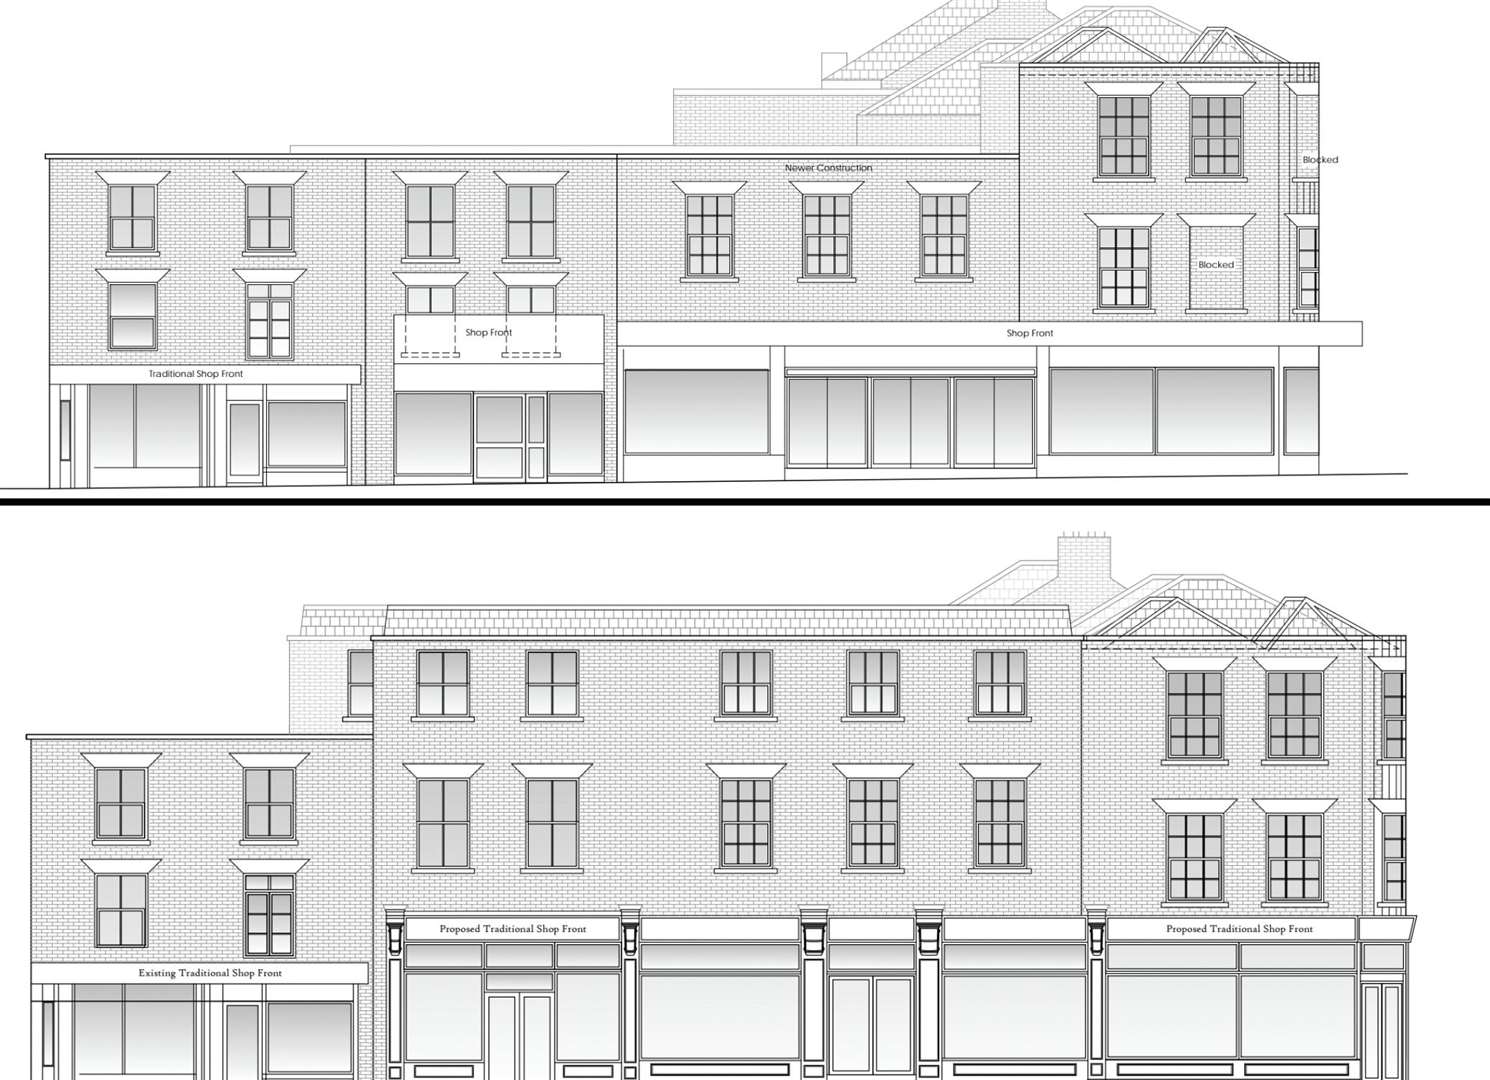 How the building looks from the high street (top) compared to how it could look under the new plans (bottom)